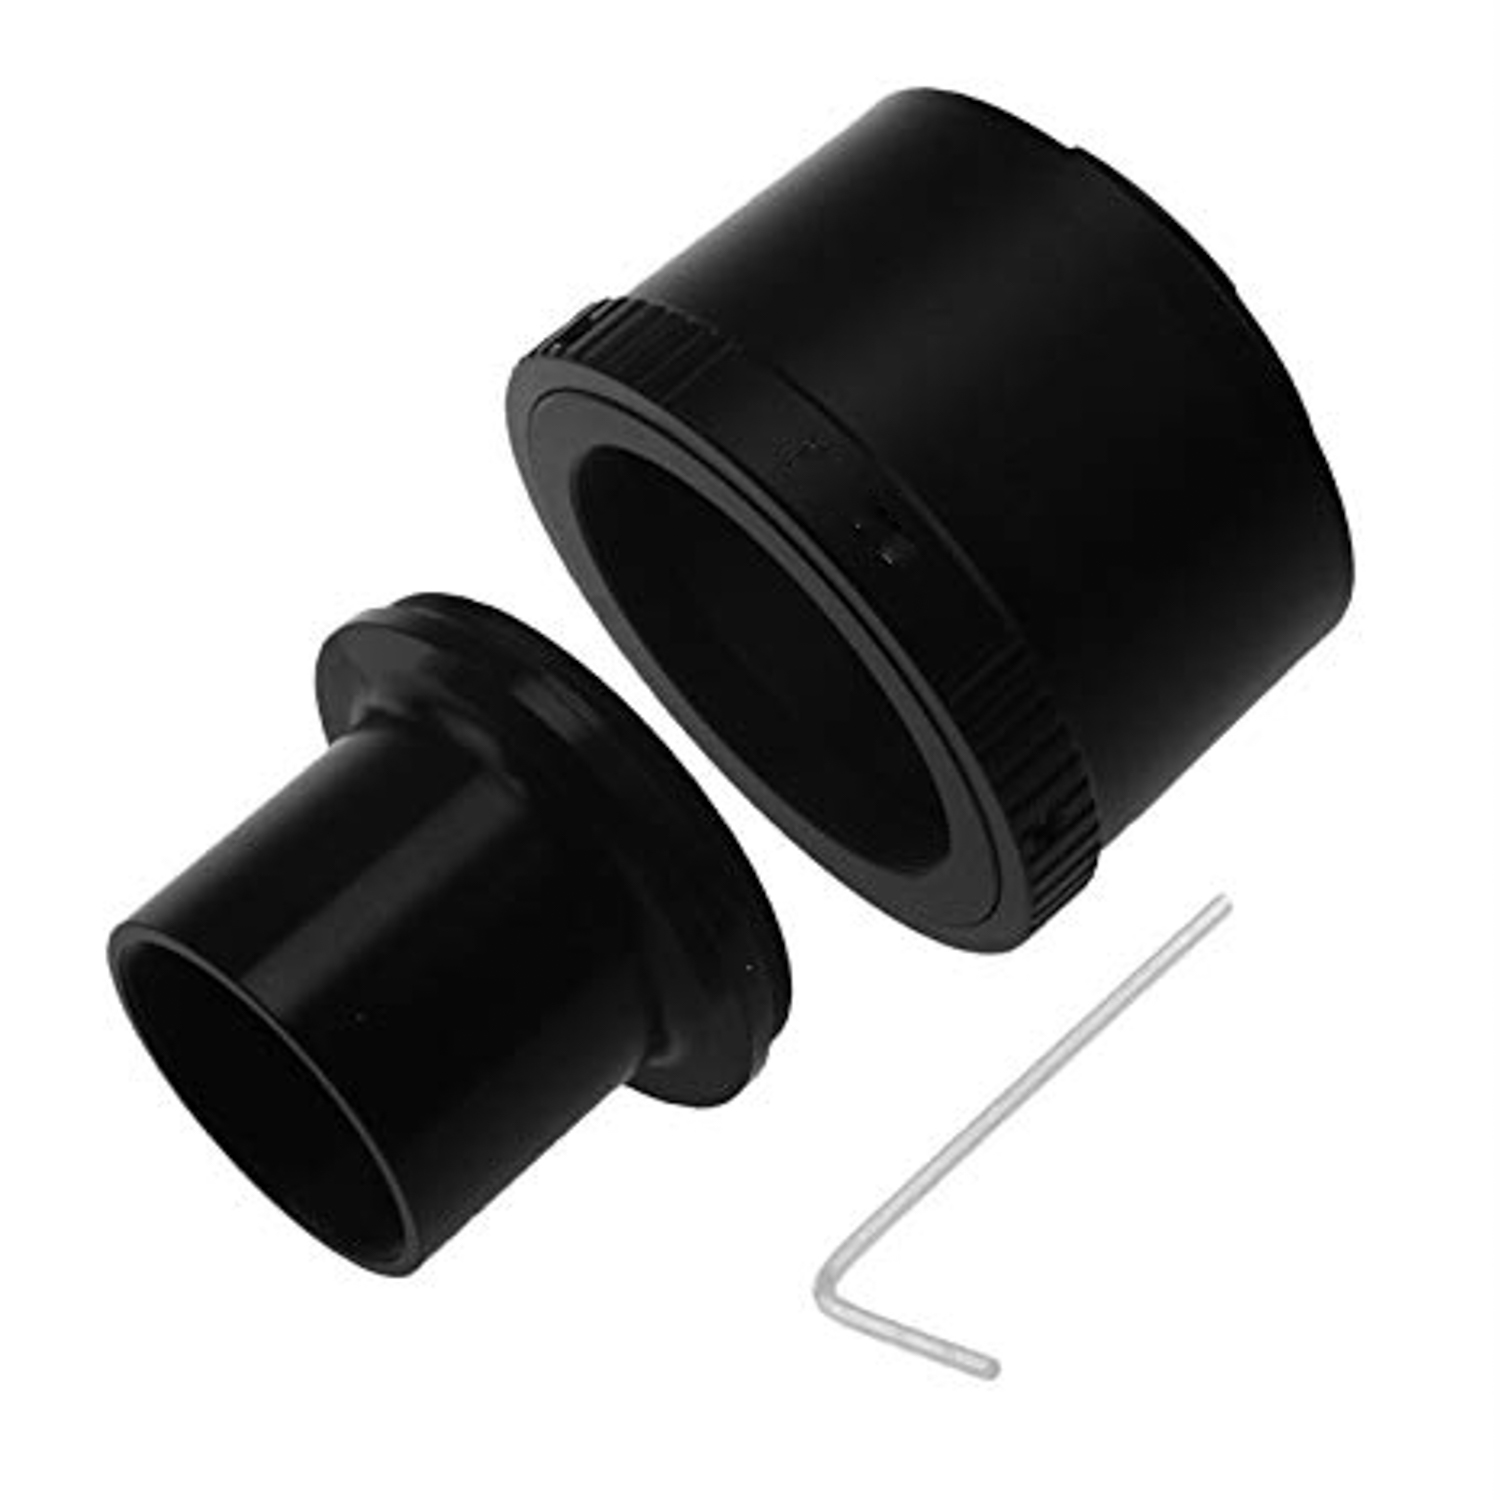 1.25 inch Telescope Adapter Mount & T2 Adapter for Canon EOSM DSLR Connect Canon Dslr To Telescope